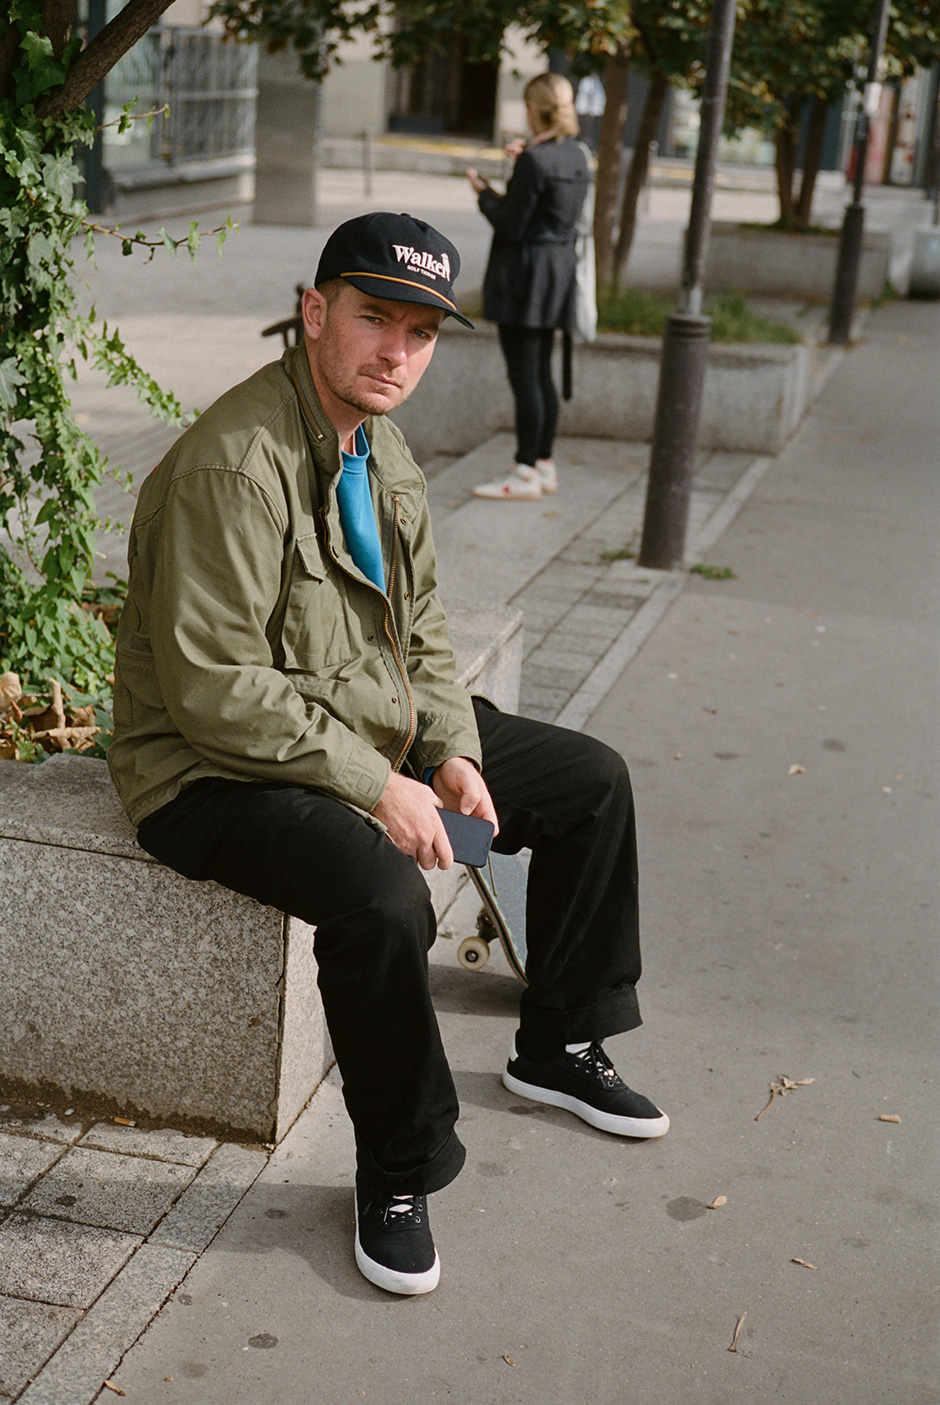 Jack Fardell on a London filming mission during the adidas Skateboarding trip. Photo by Zander Taketomo